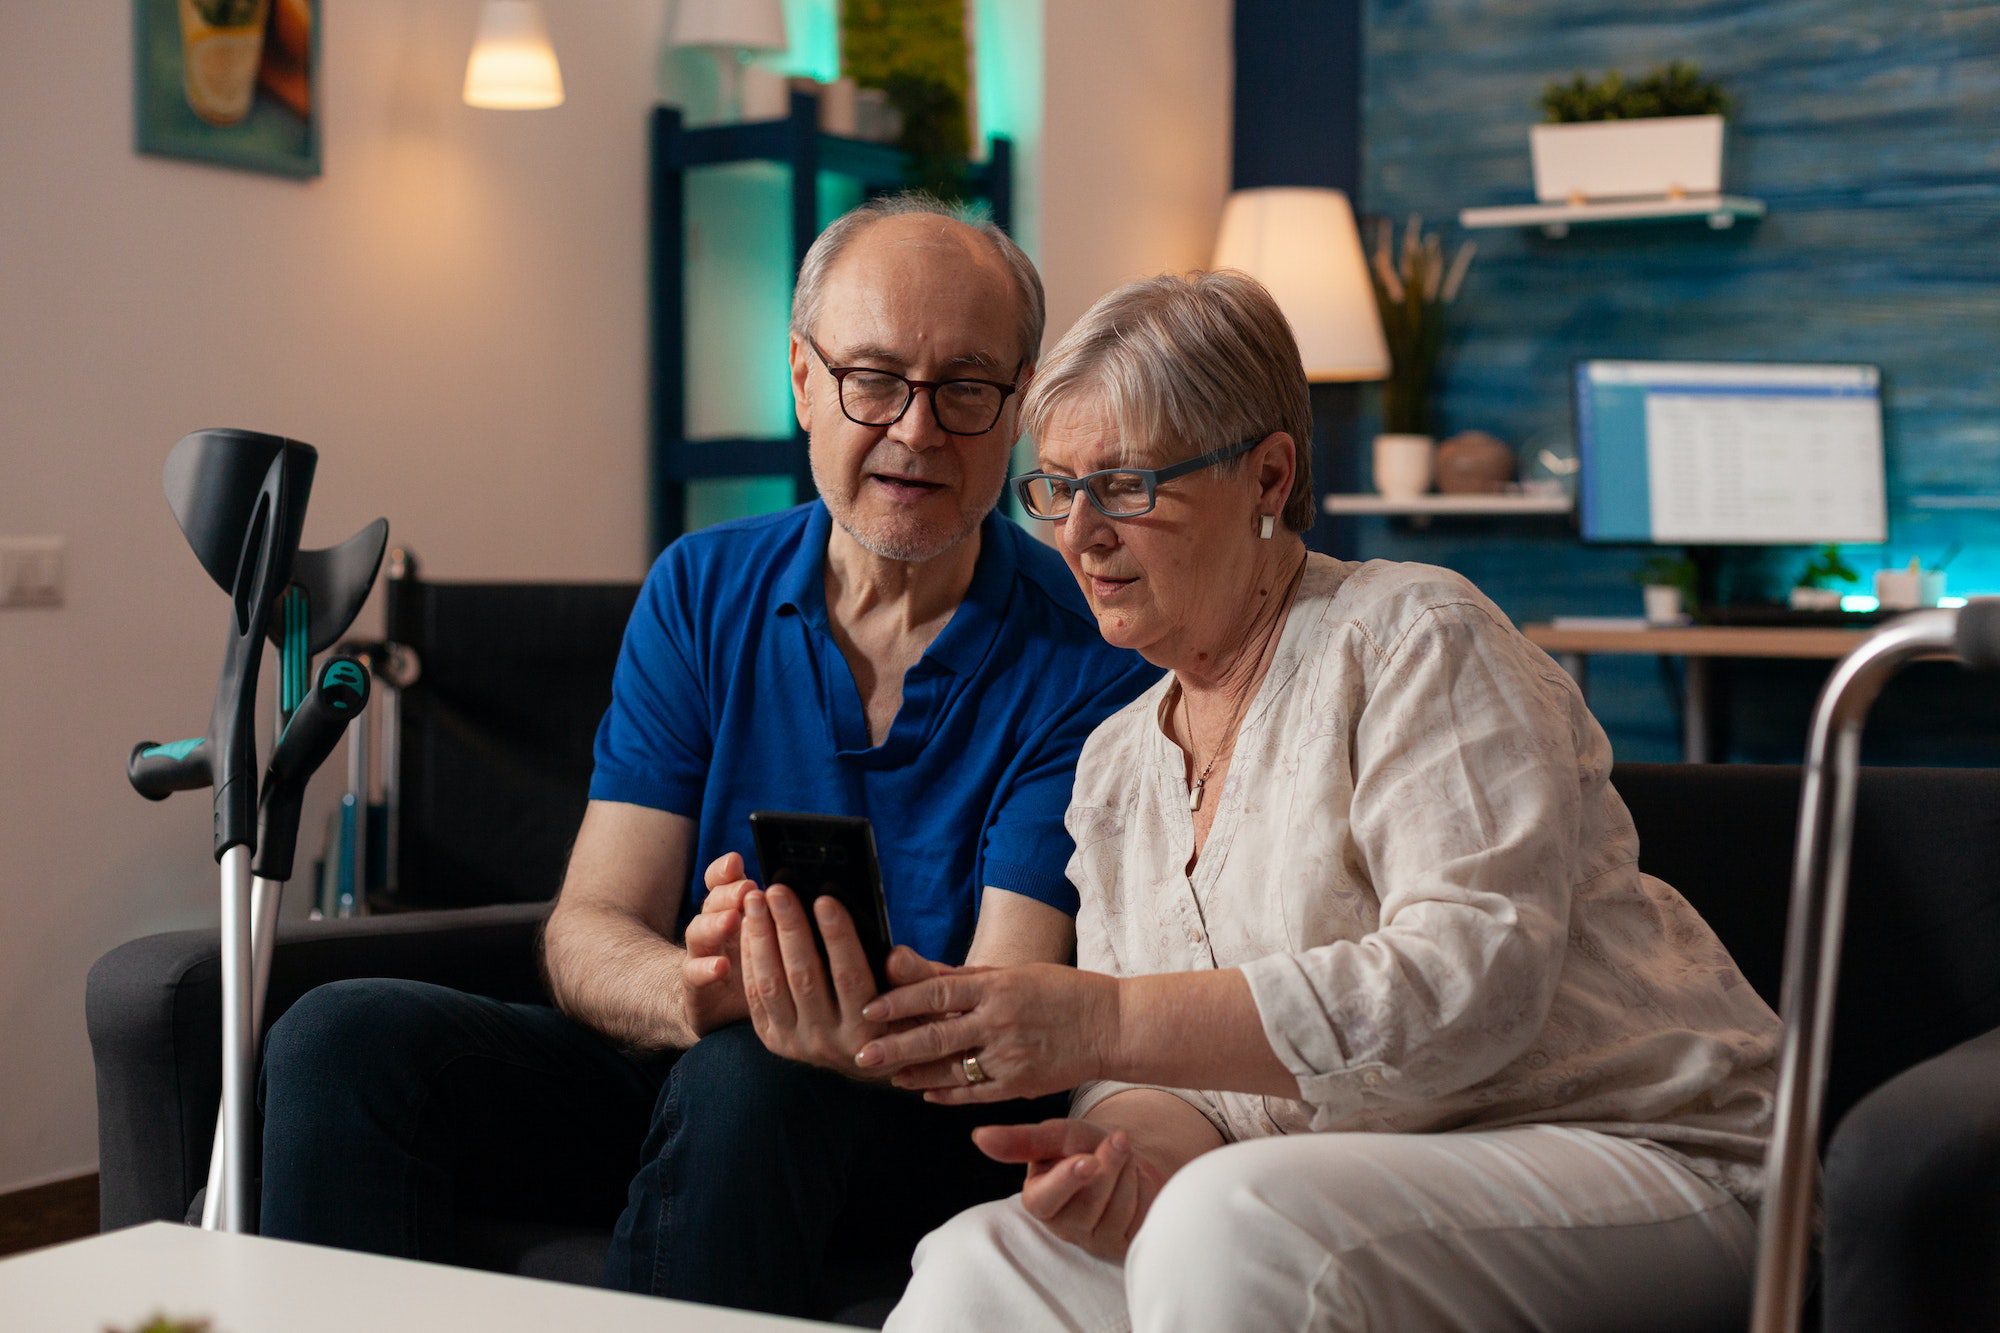 Old man and woman looking at smartphone screen